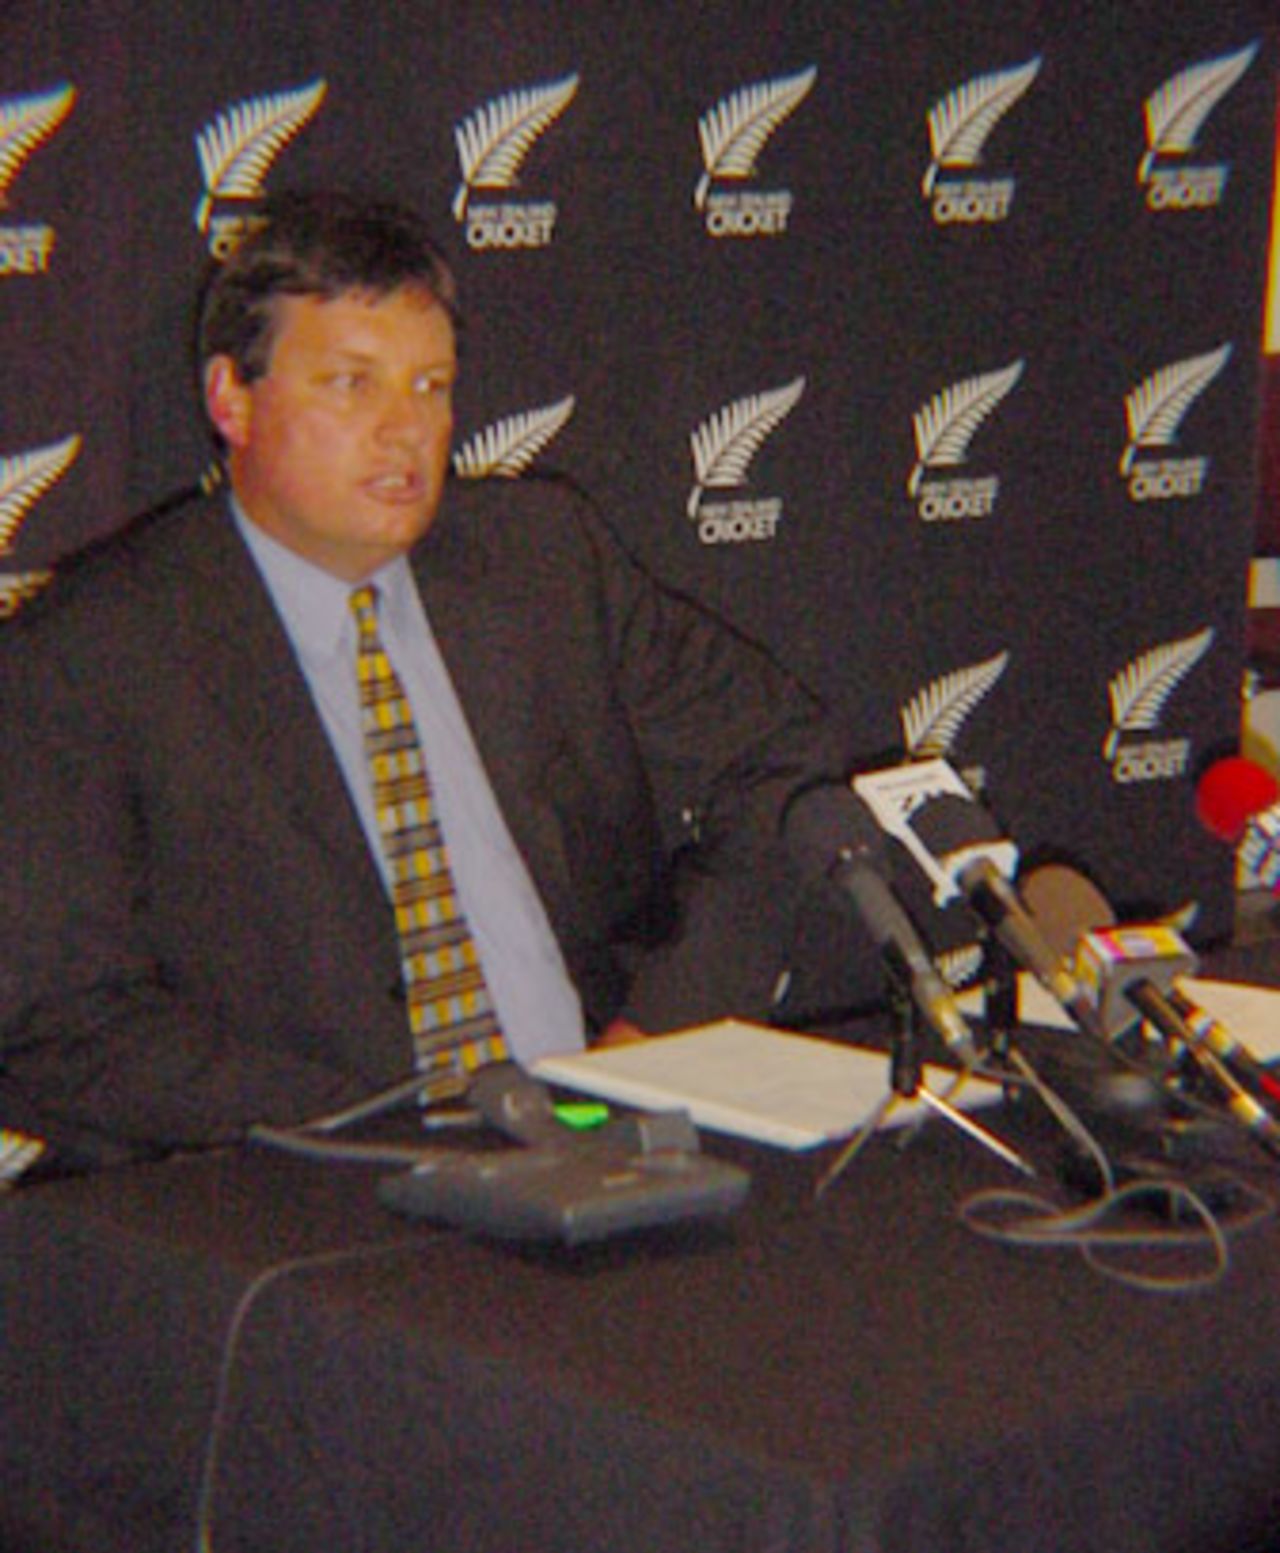 New Zealand Cricket chief executive Martin Snedden announces the abandonment of the New Zealand tour of Pakistan after a bomb blast outside the teams' hotel in Karachi. 8 May 2002.